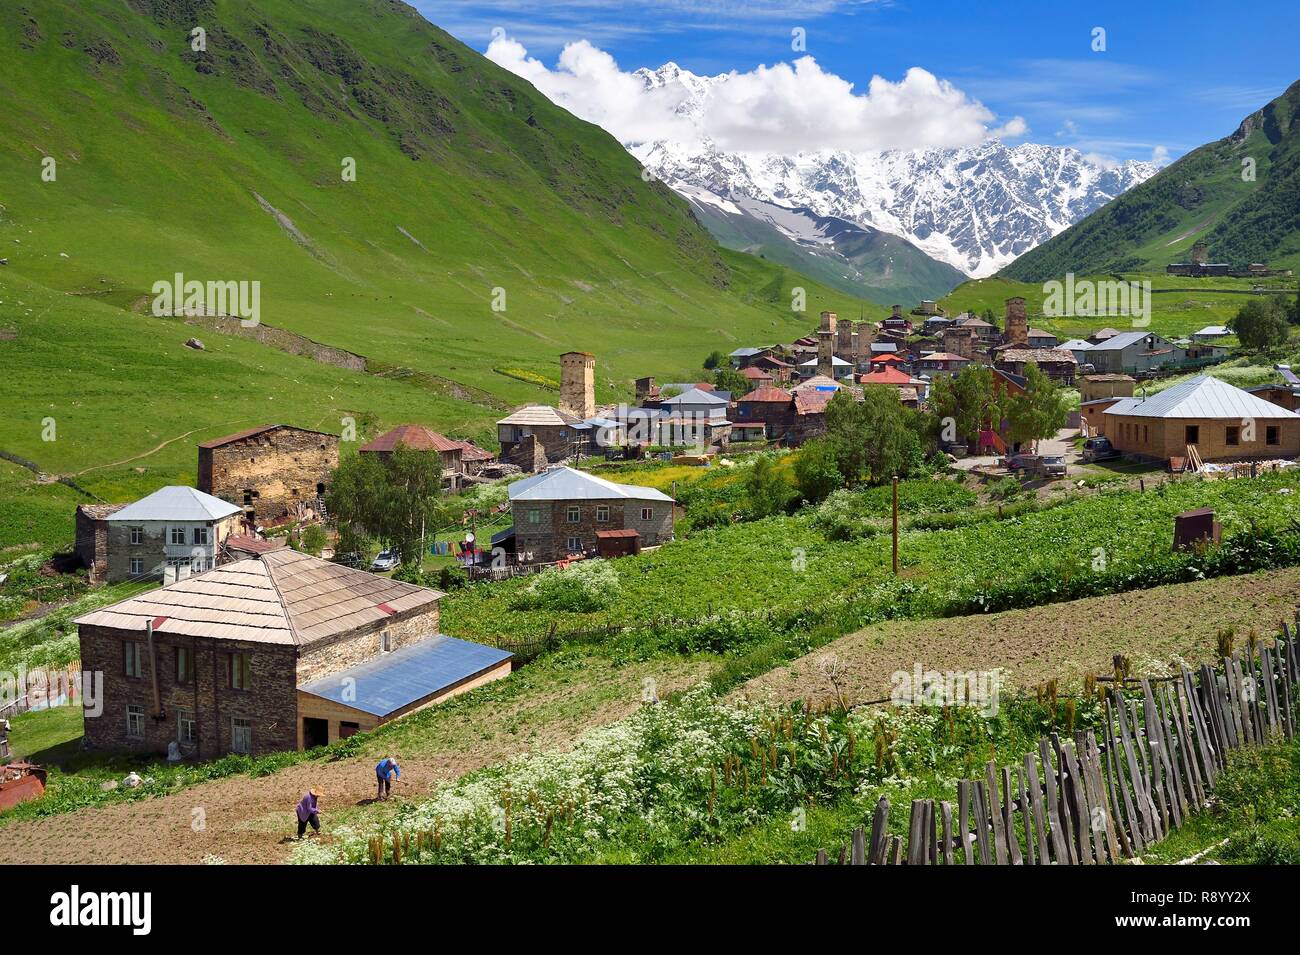 Georgia, Upper Svaneti (Zemo Svaneti), village of Ushguli, listed as World heritage by UNESCO, Svan defensive towers erected next to the houses and Mount Chkhara (highest peak in Georgia with 5,193 m) in the background, two farmers plow their field Stock Photo